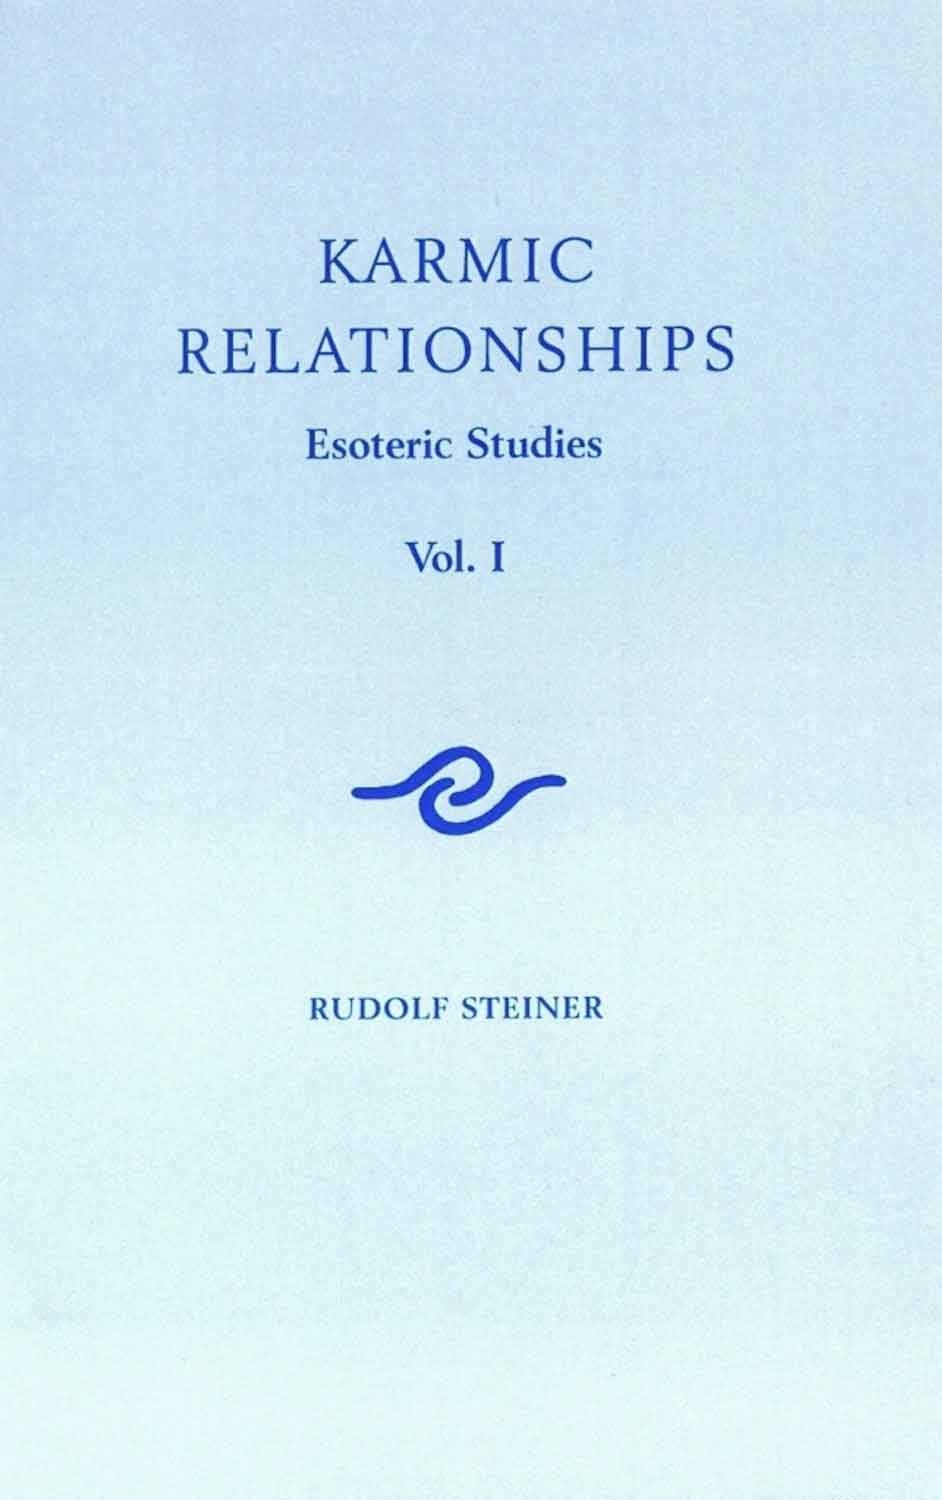 Episode 6: Lecture 6: Karmic Relationships given on February 23 1924 by Rudolf Steiner